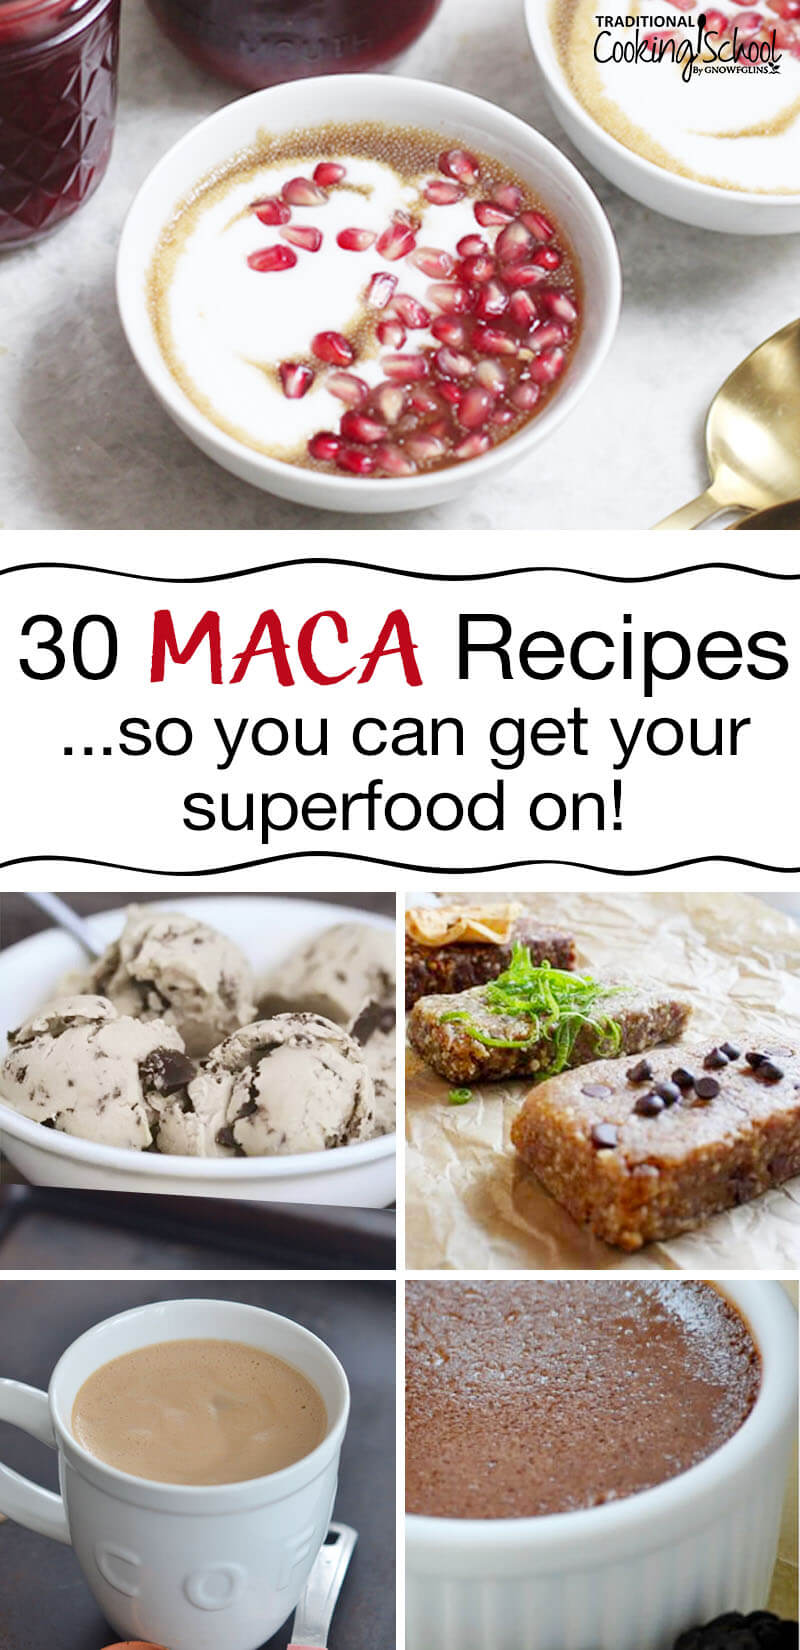 30 Maca Recipes - how to take and how to eat this amazing superfood! Maca has an amazing energizing effect and the positive effects on fertility, hormone balancing and more are really catching wind. Consider this adaptogenic superfood as a healthy addition to your lifestyle -- one that might be the missing link if you experience low energy levels, depression, compromised immunity, or hormonal imbalances. #macapowder #smoothie #organic #coffee #uses #recipe